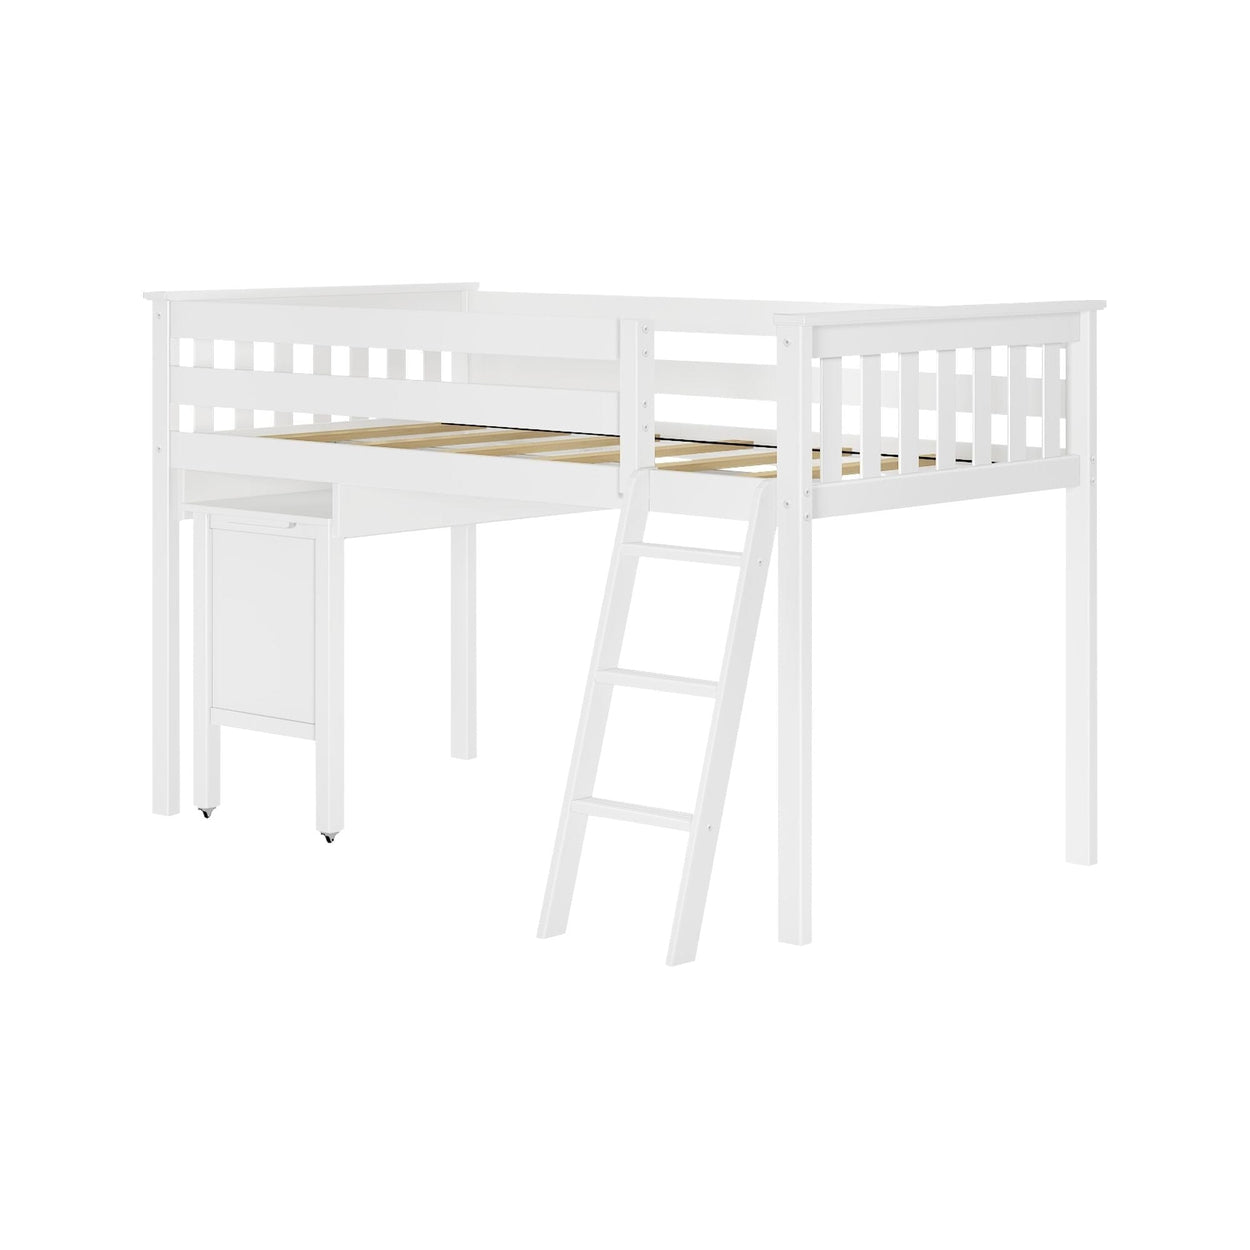 185212-002 : Loft Beds Twin-Size Low Loft with Pull-Out Desk, White